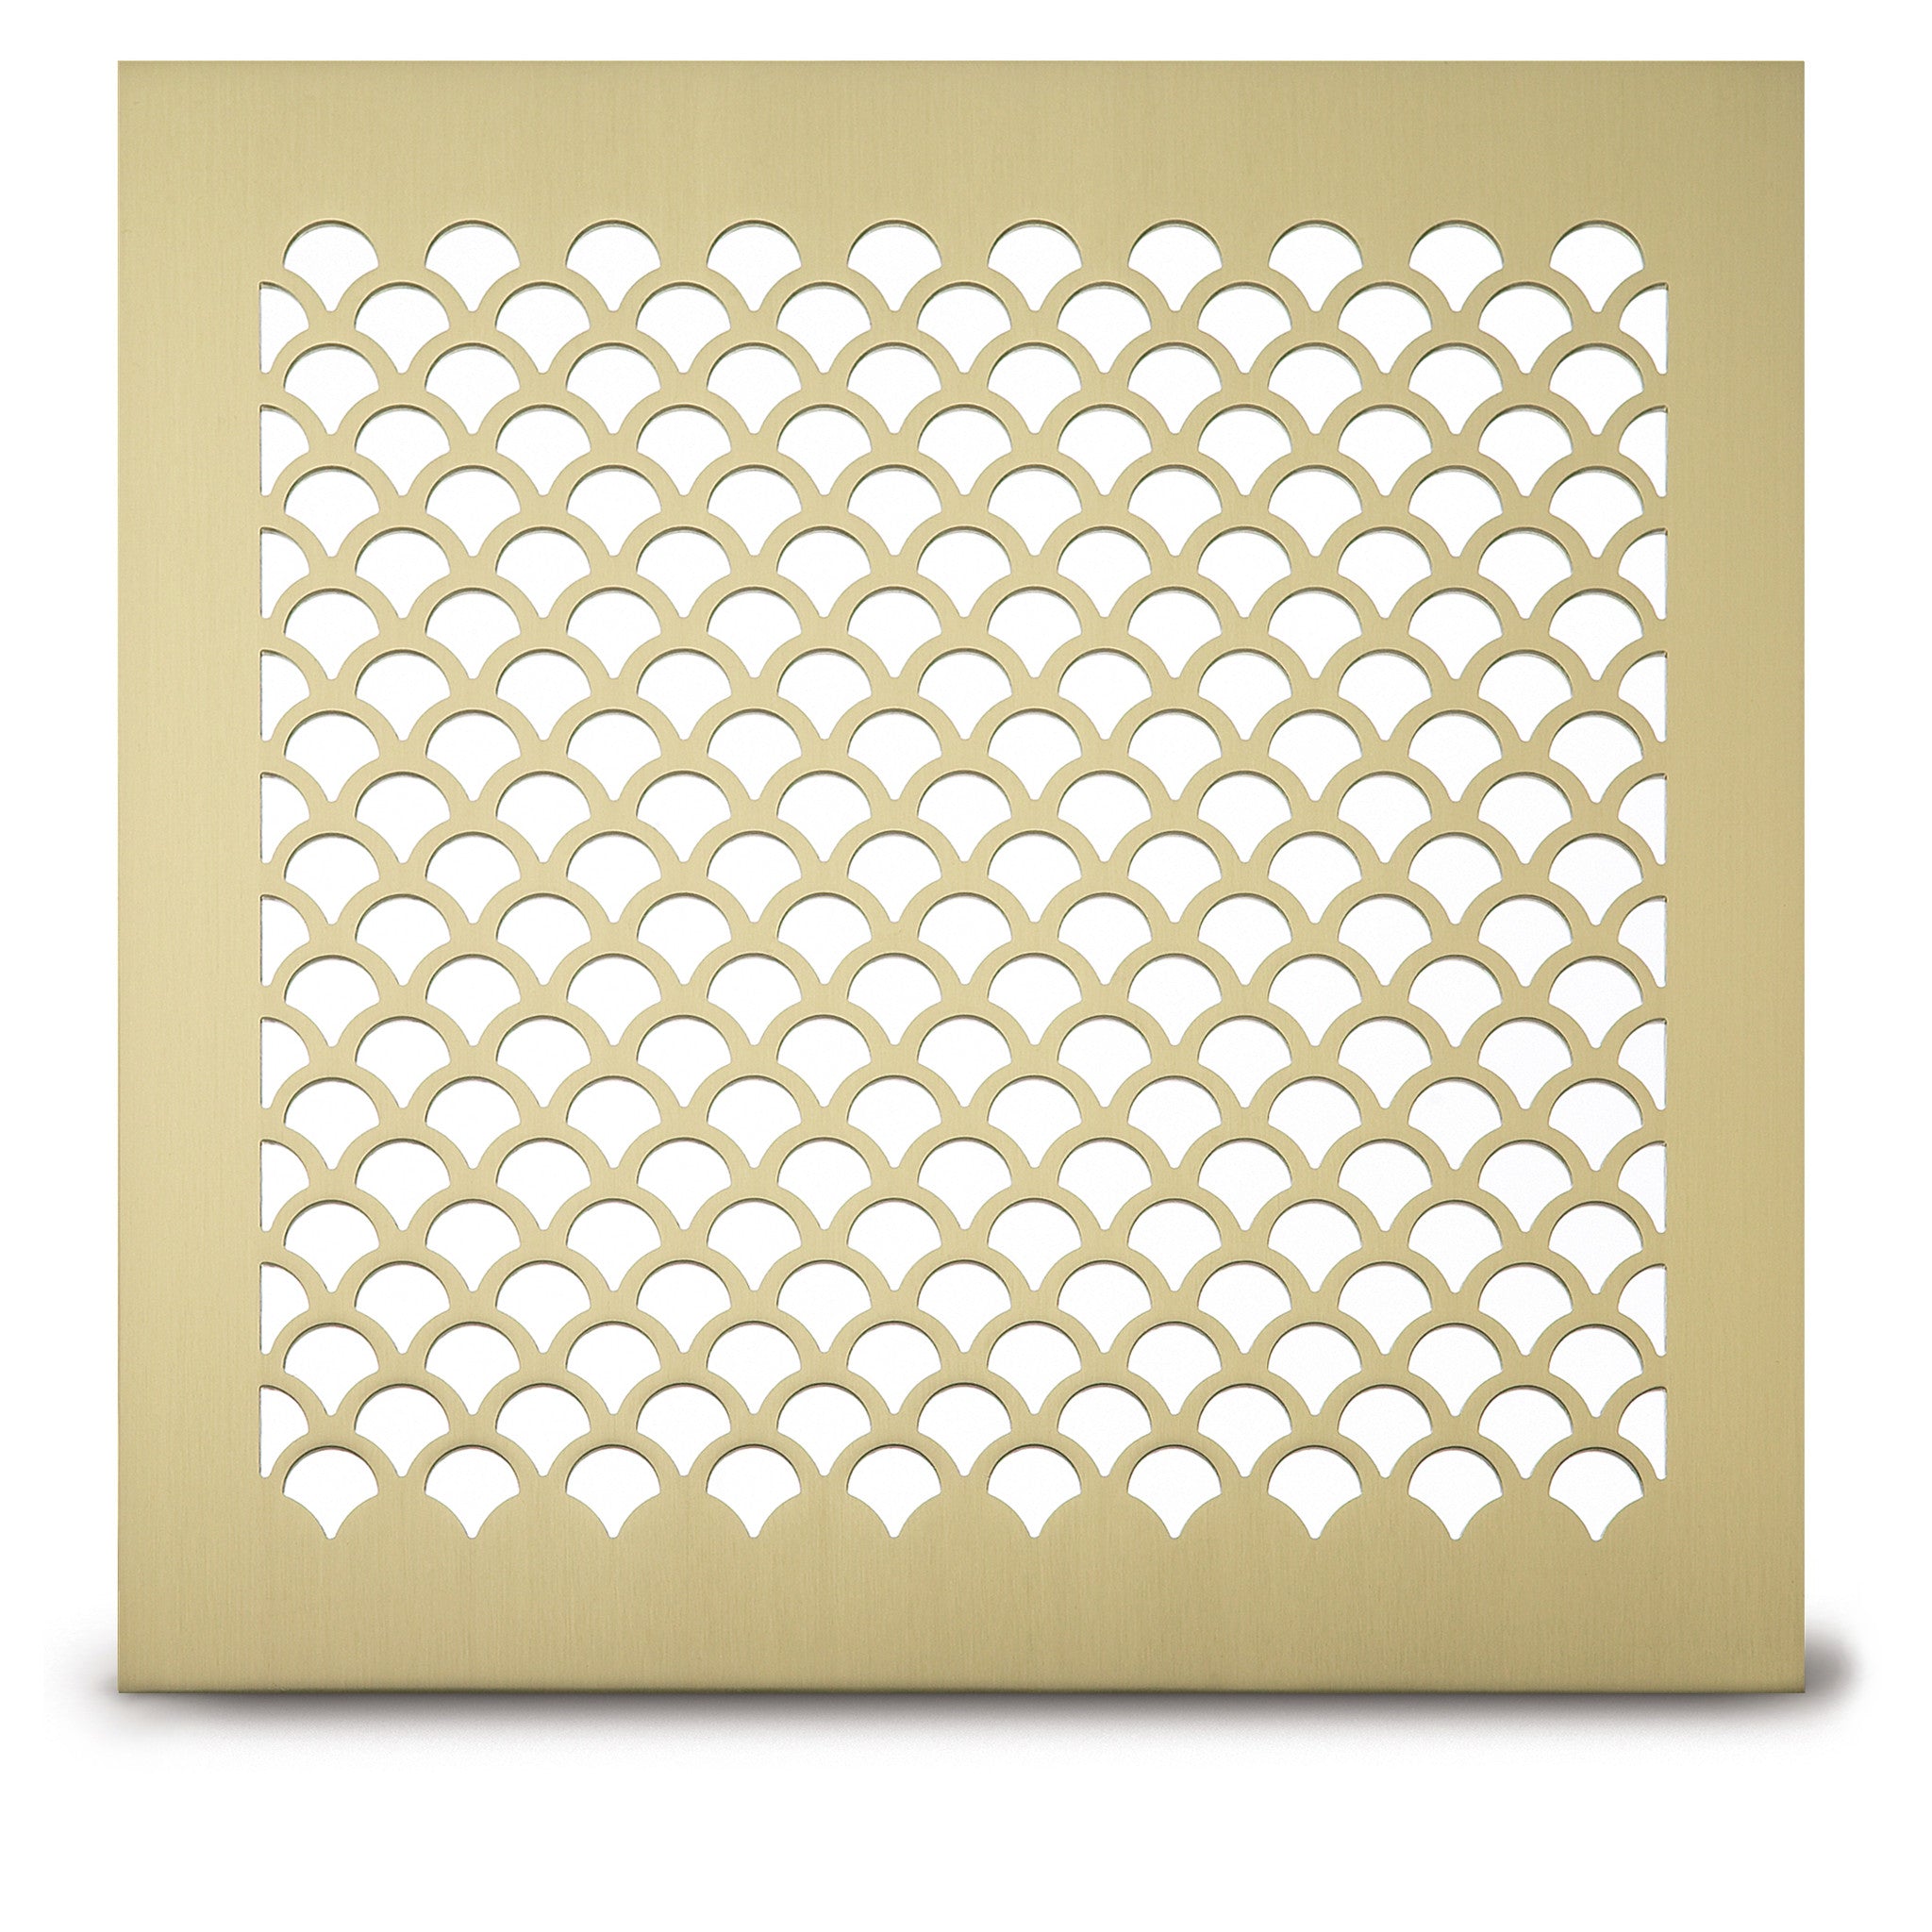 207 Shell Perforated Grille: 5/8” patter - 48% open area